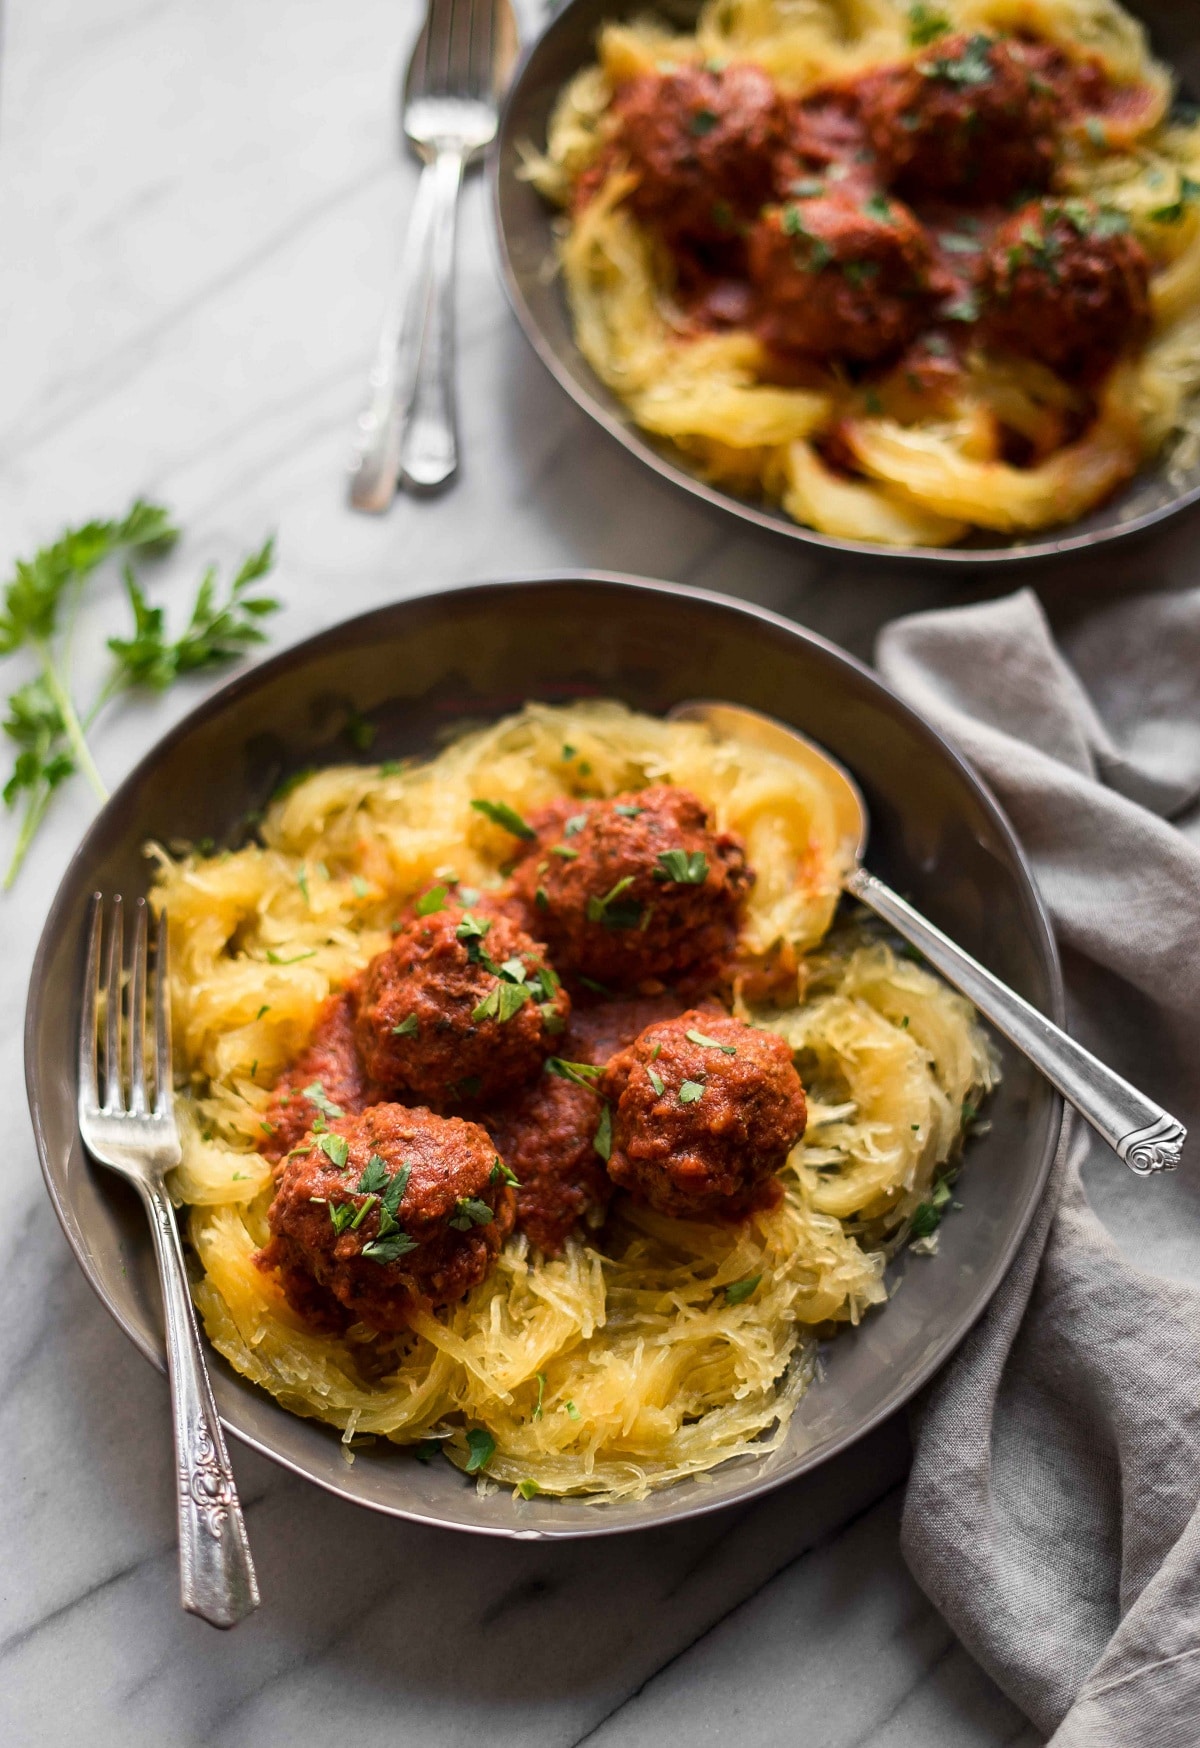 Instant pot meatballs on top of spaghetti squash noodles on a plate